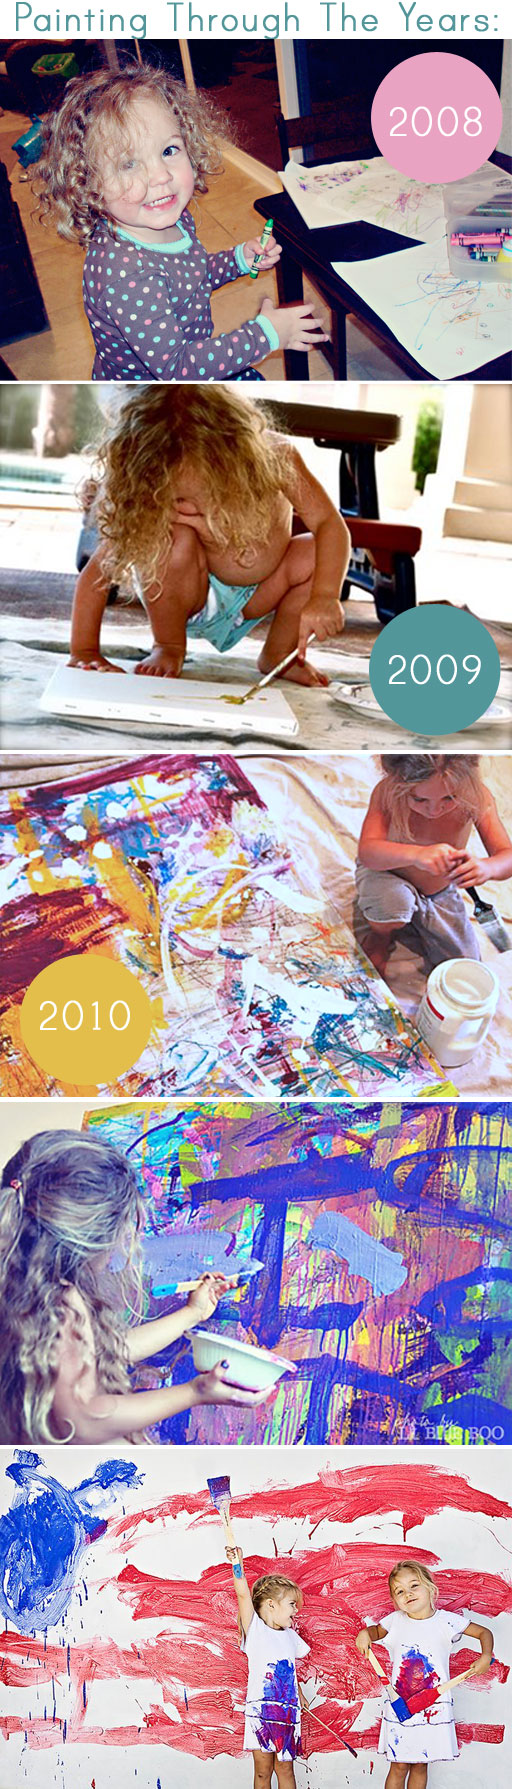 Painting by Boo Hackshaw over the years via lilblueboo.com